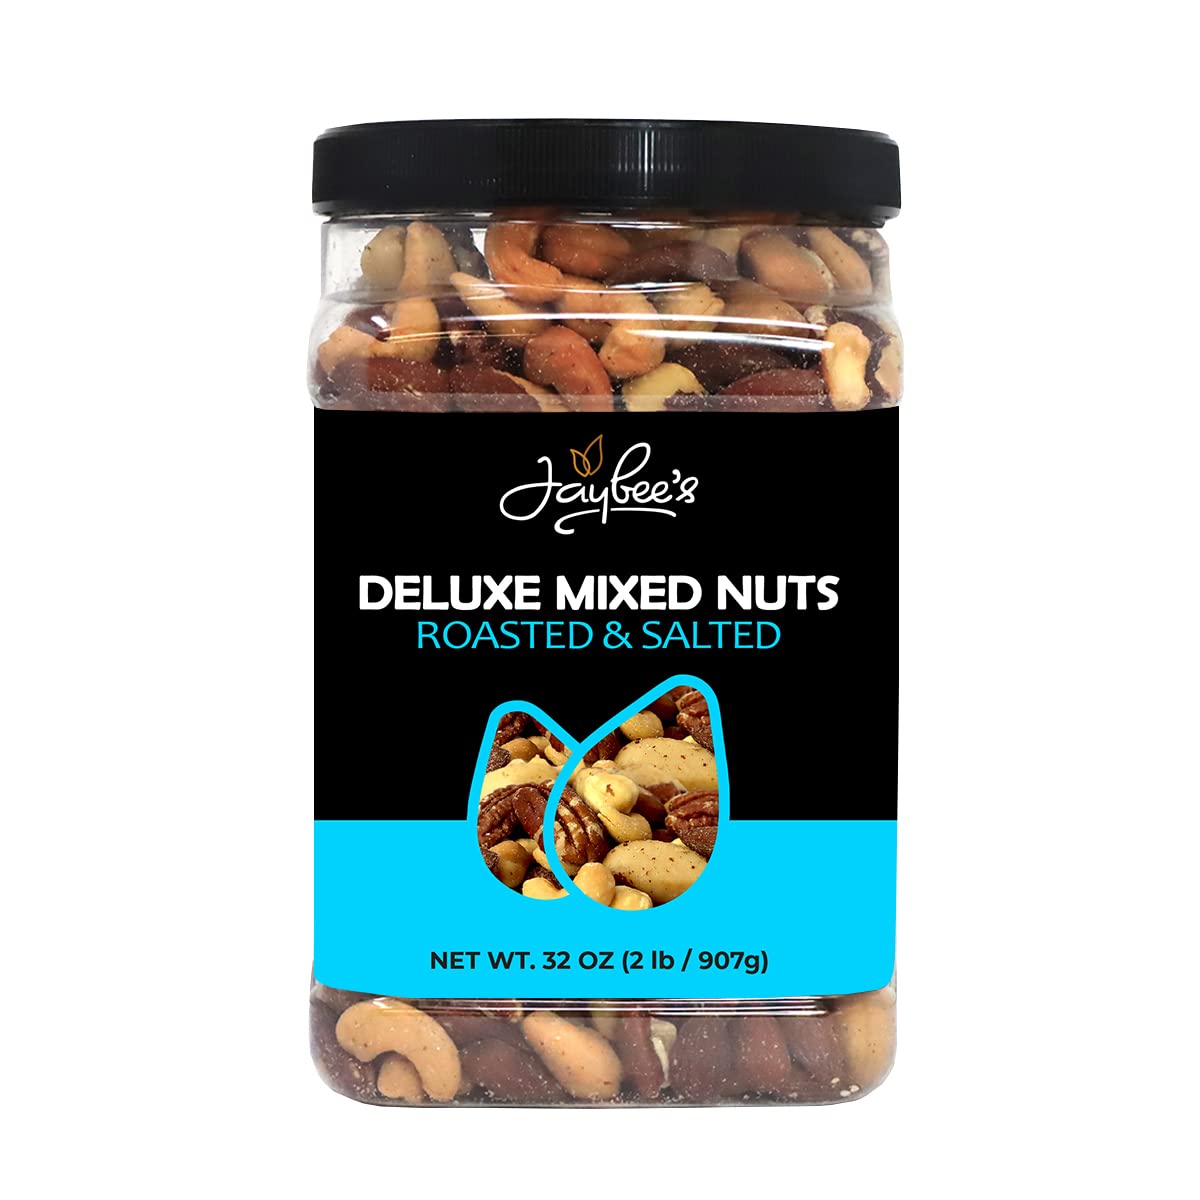 Deluxe Mixed Gourmet Nuts Roasted & Salted - 32 oz Reusable Container | Cashews, Almonds, Brazil Nuts, Pecans, Filberts | Healthy Variety Snack Mix 